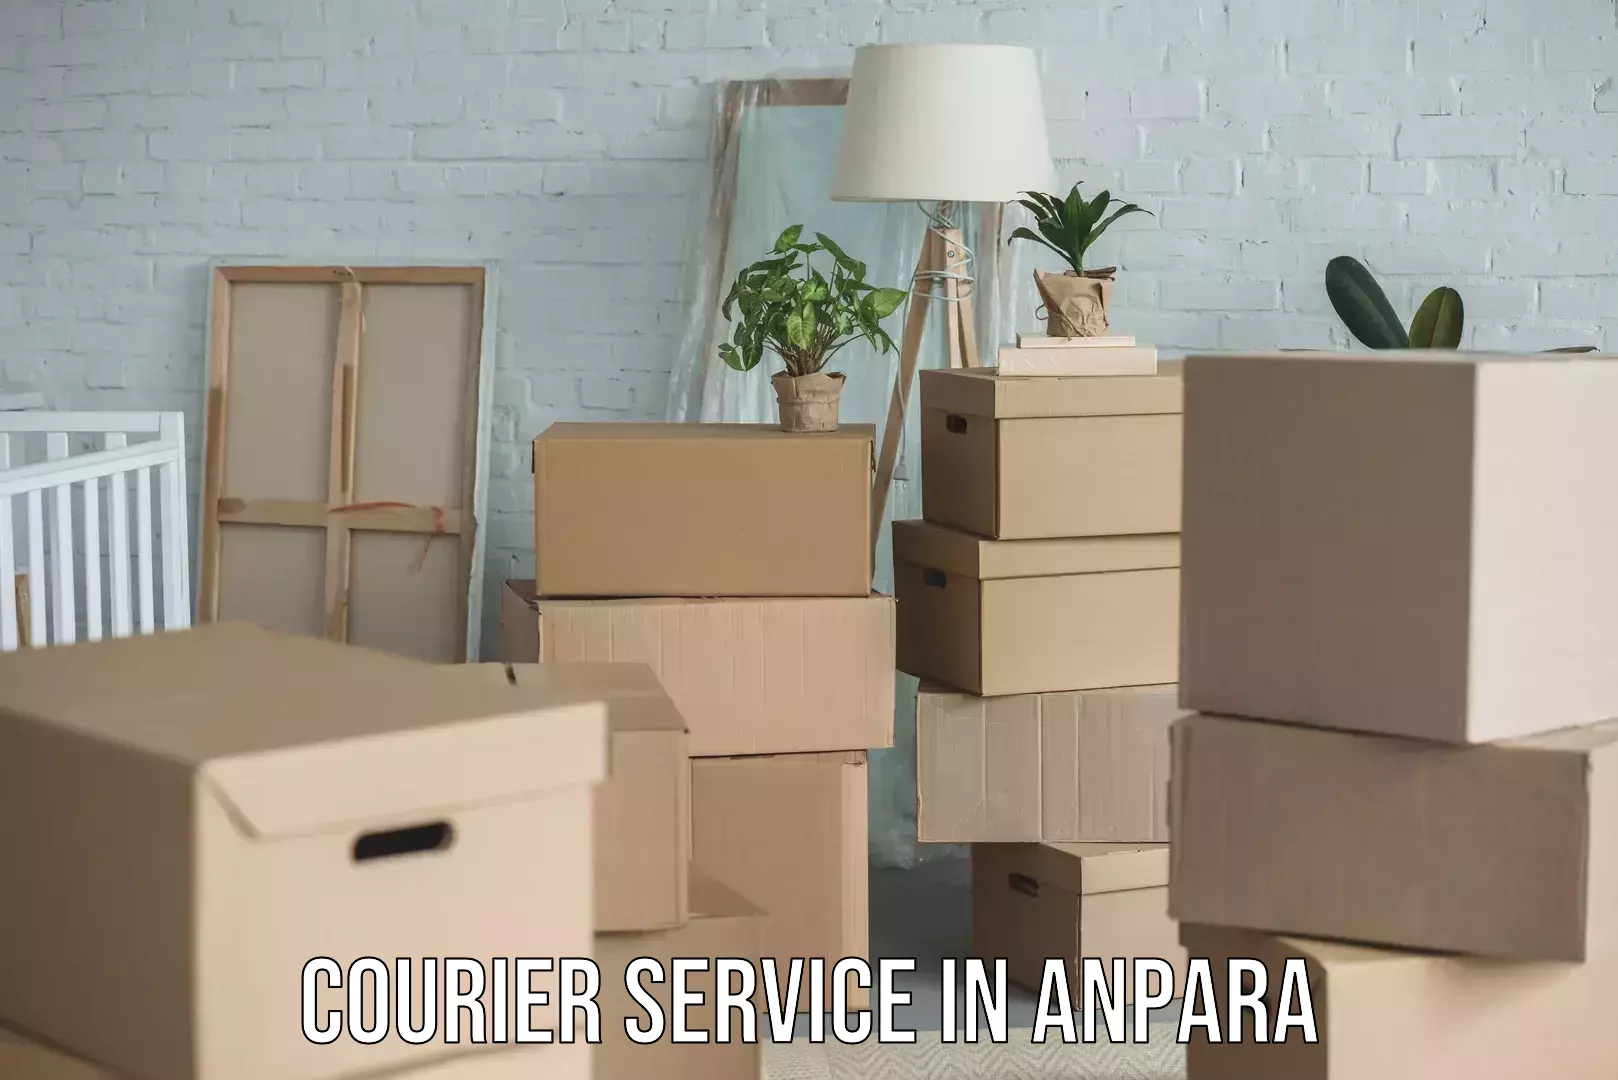 Secure freight services in Anpara